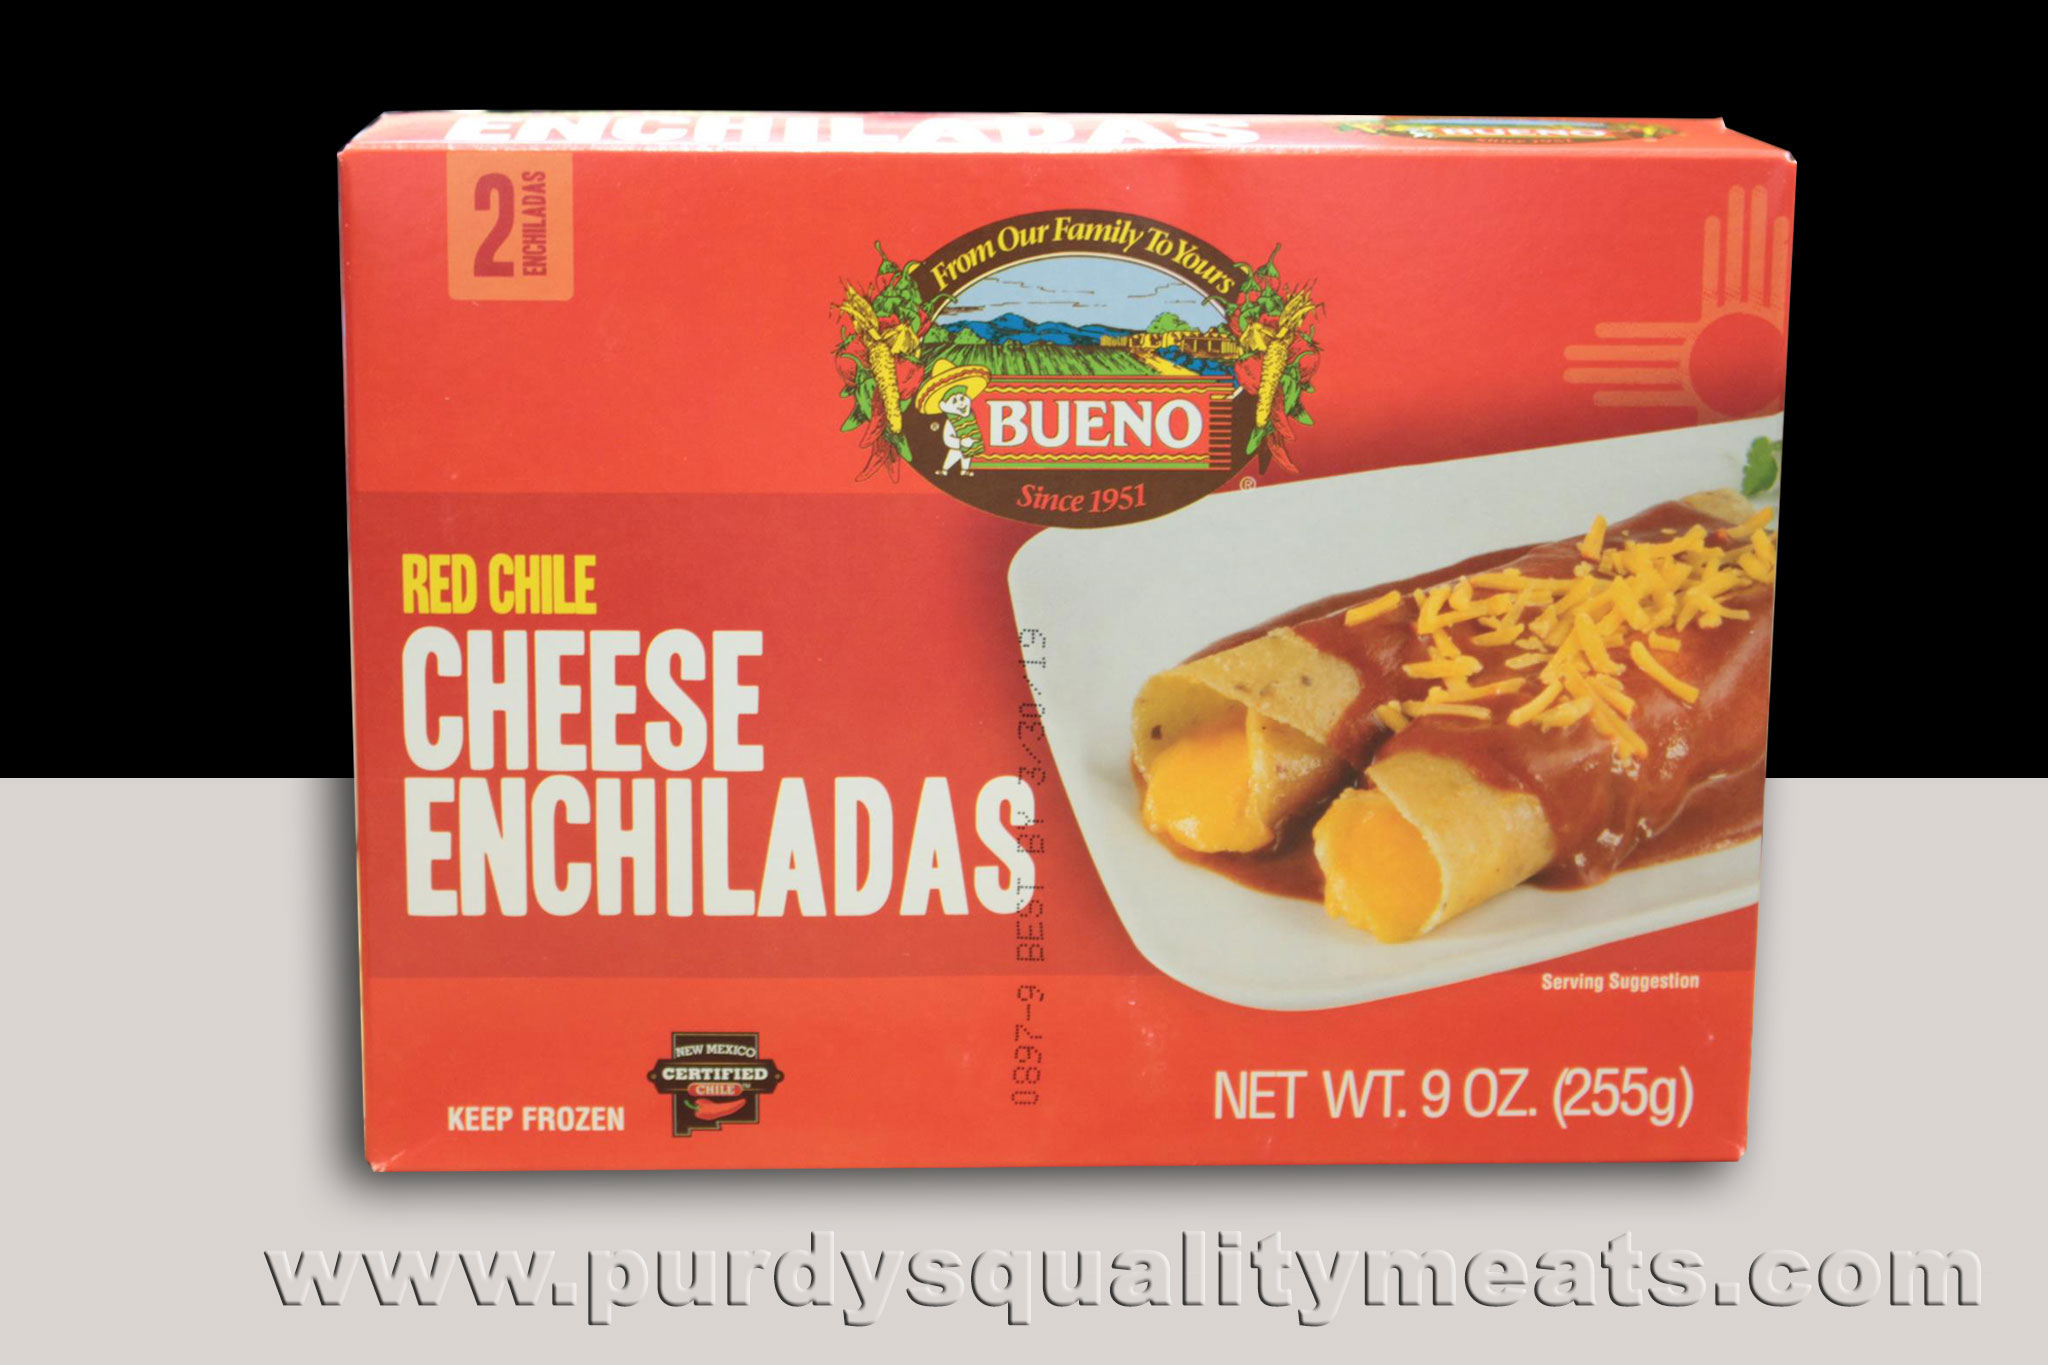 This image icon displays the Purdy's Quality Meats Red Chile Cheese Enchiladas image